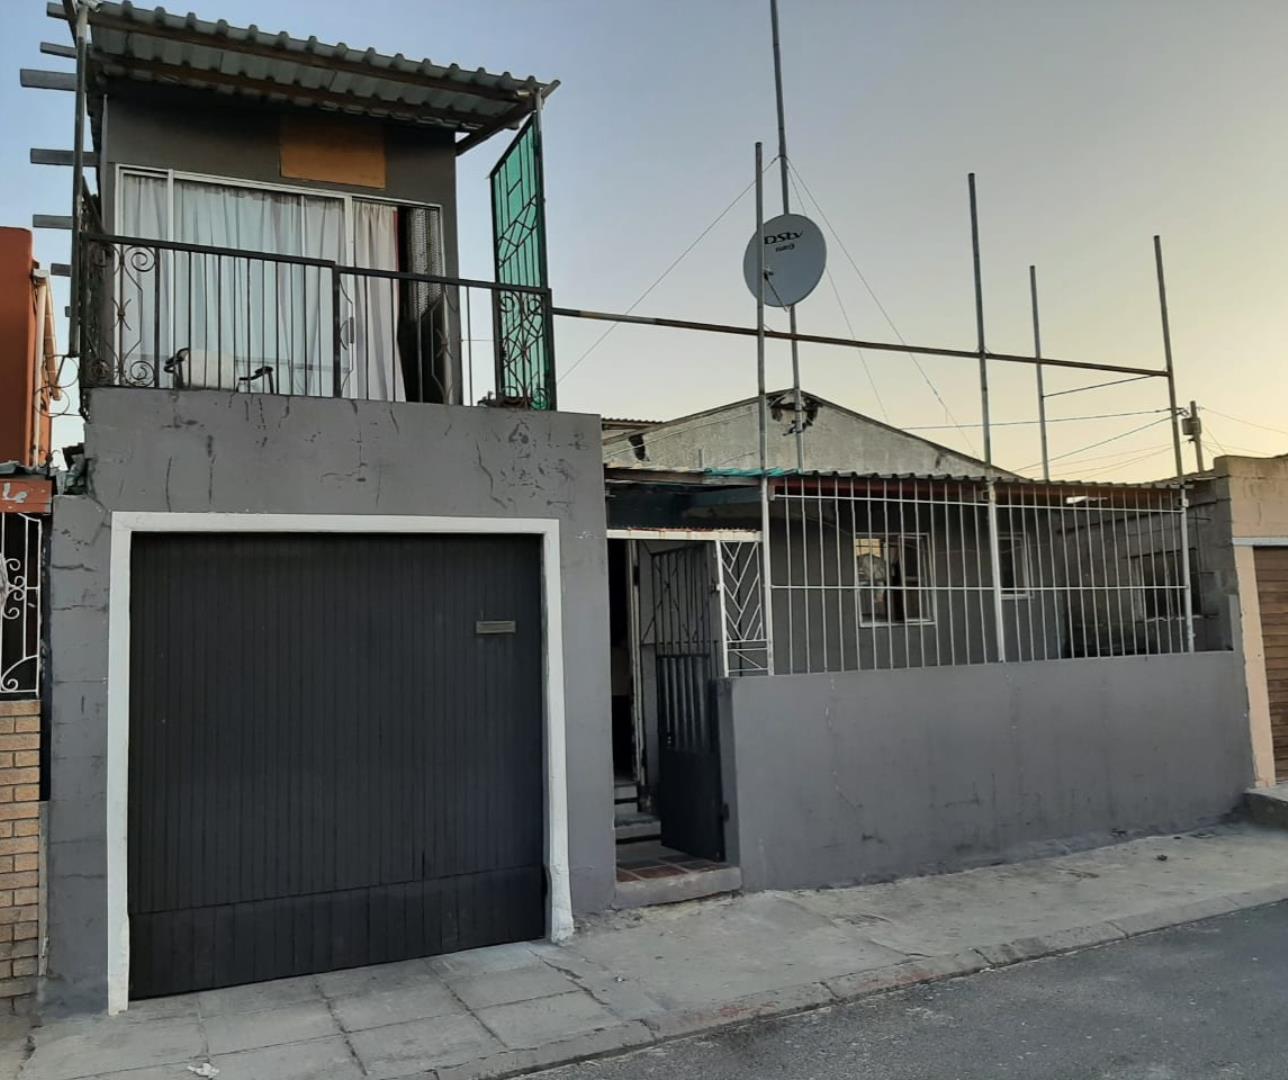 5 Bedroom House for Sale - Western Cape